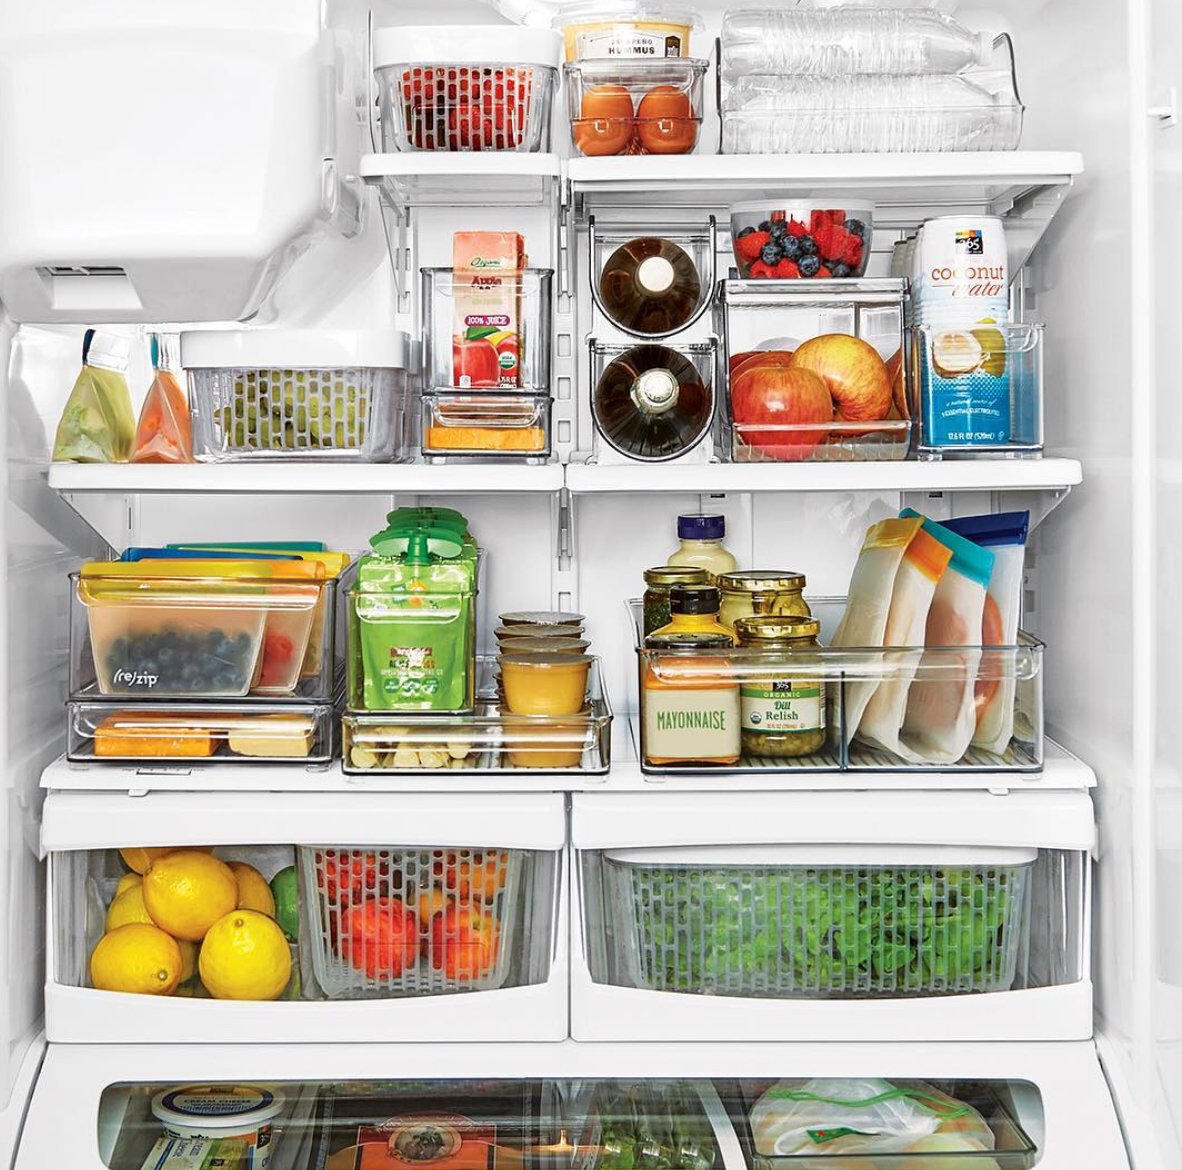 https://theinspiredhome.com/wp-content/uploads/2023/02/how-to-clean-and-organize-your-fridge-the-inspired-home.jpg